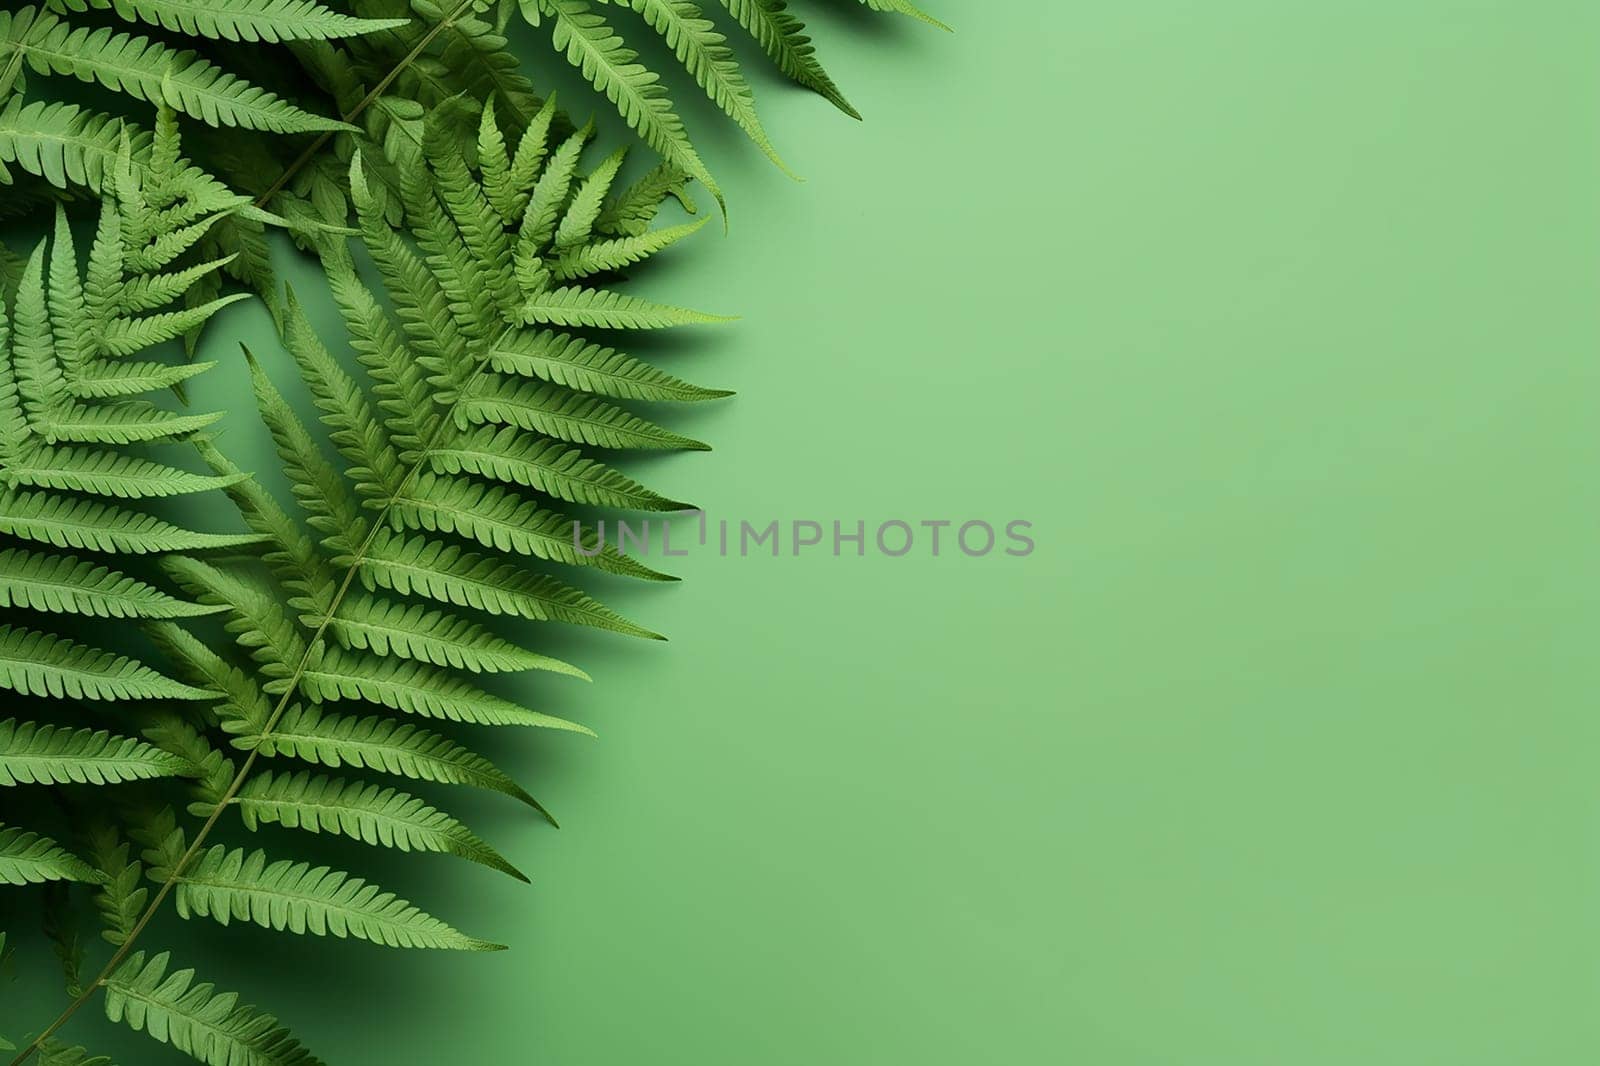 Lush green fern leaves against a plain background. by Hype2art